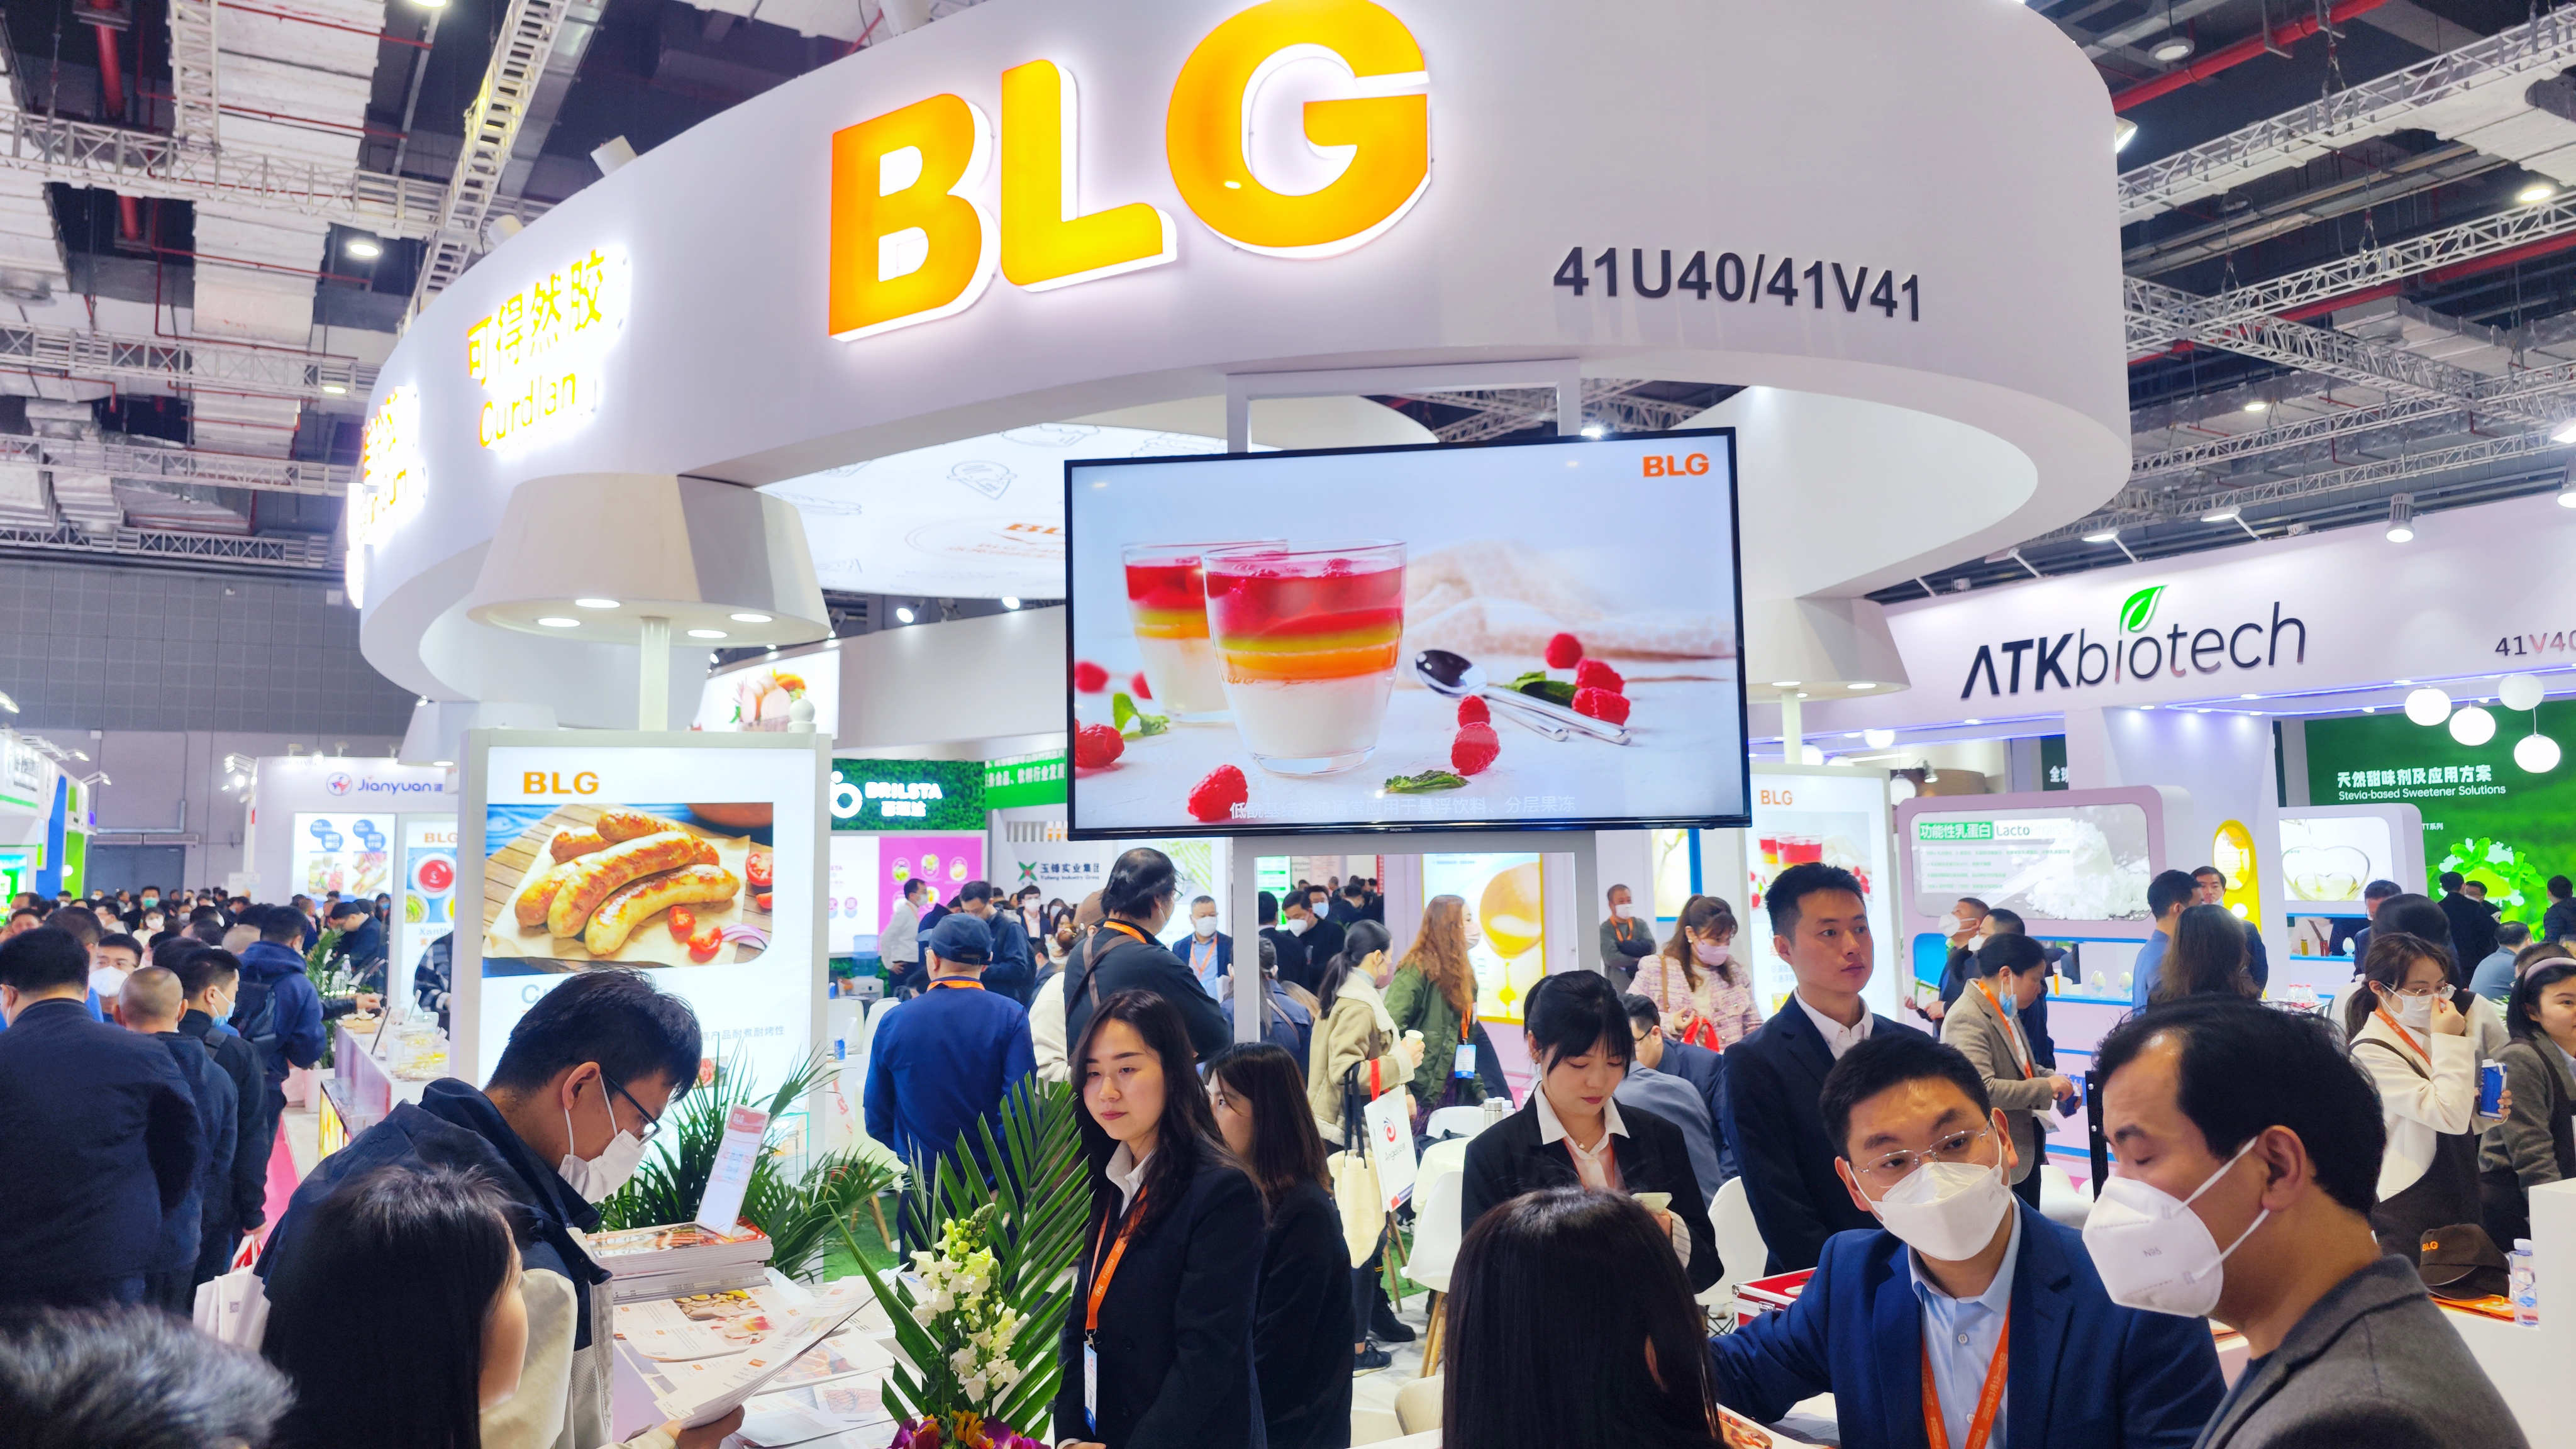 BLG Exhibition Review | Shanghai FIC Successfully Held